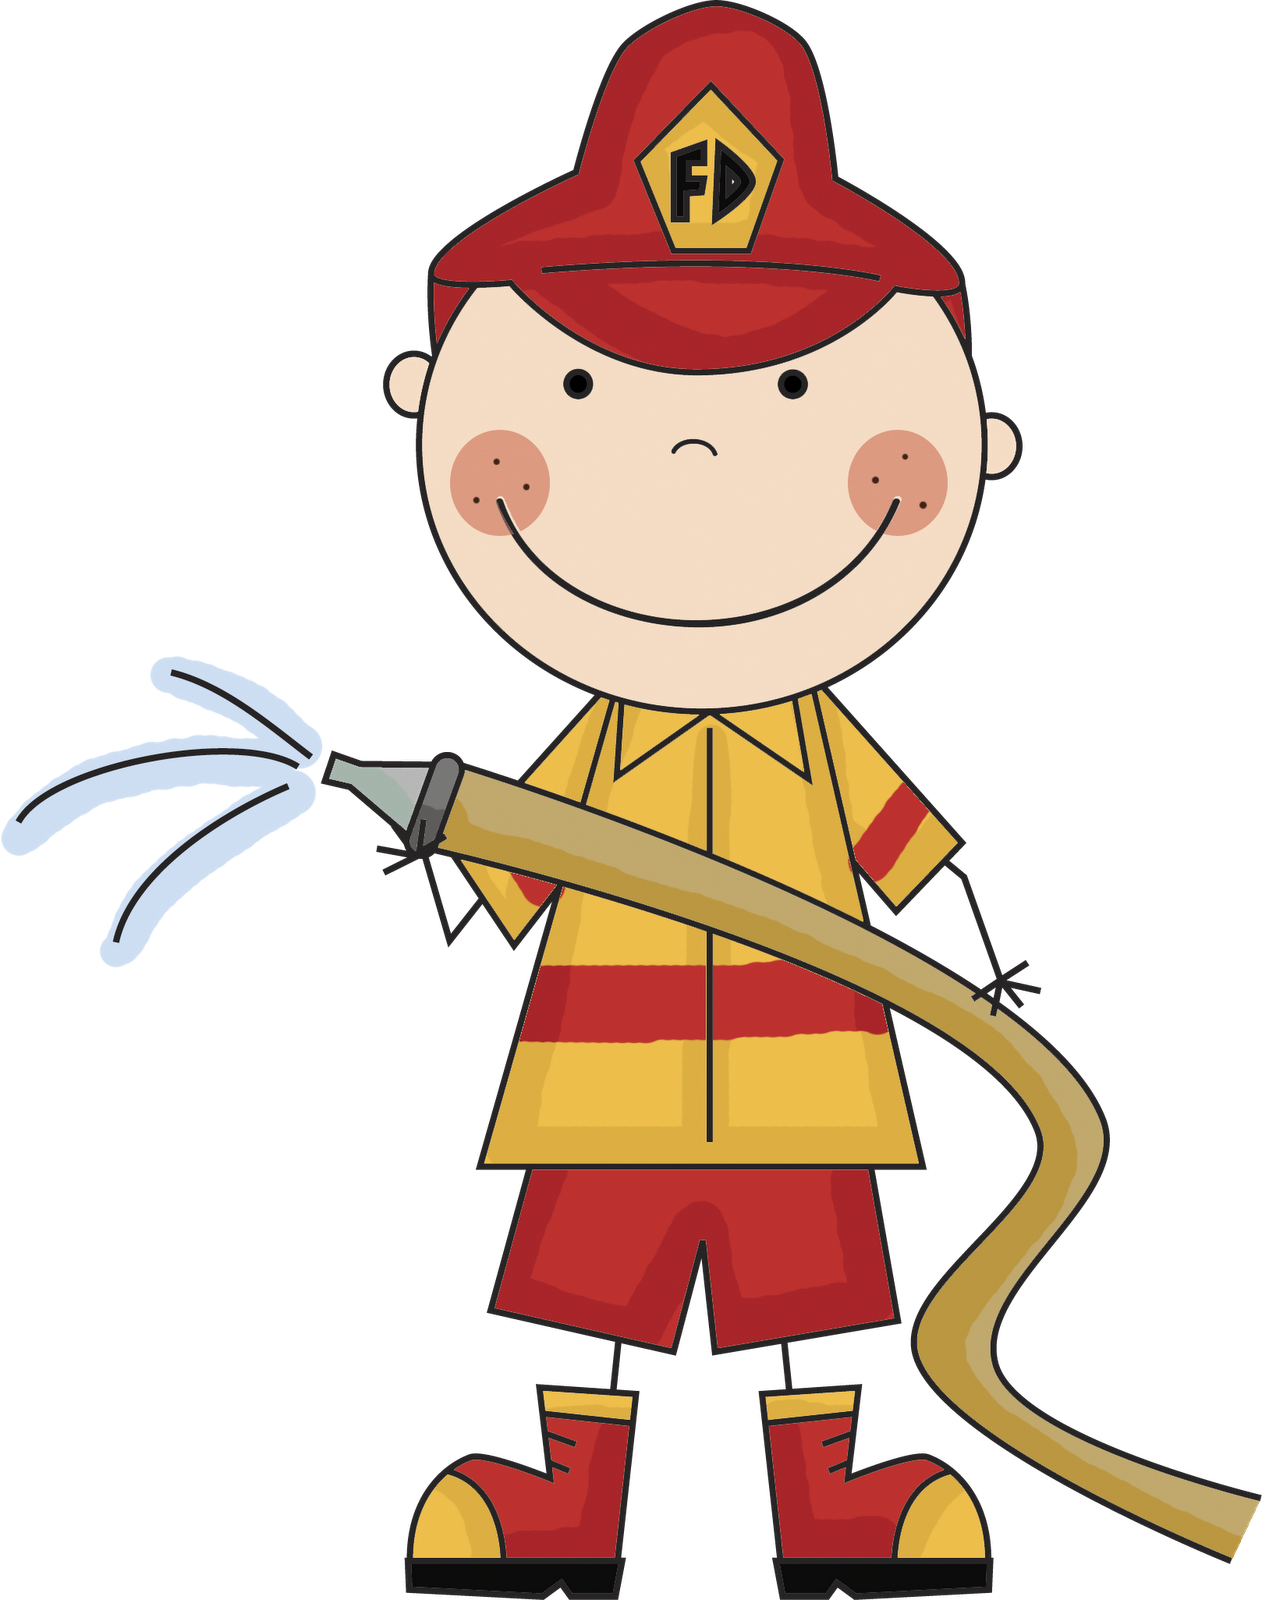 Fire Safety Clipart | Clipart Panda - Free Clipart Images